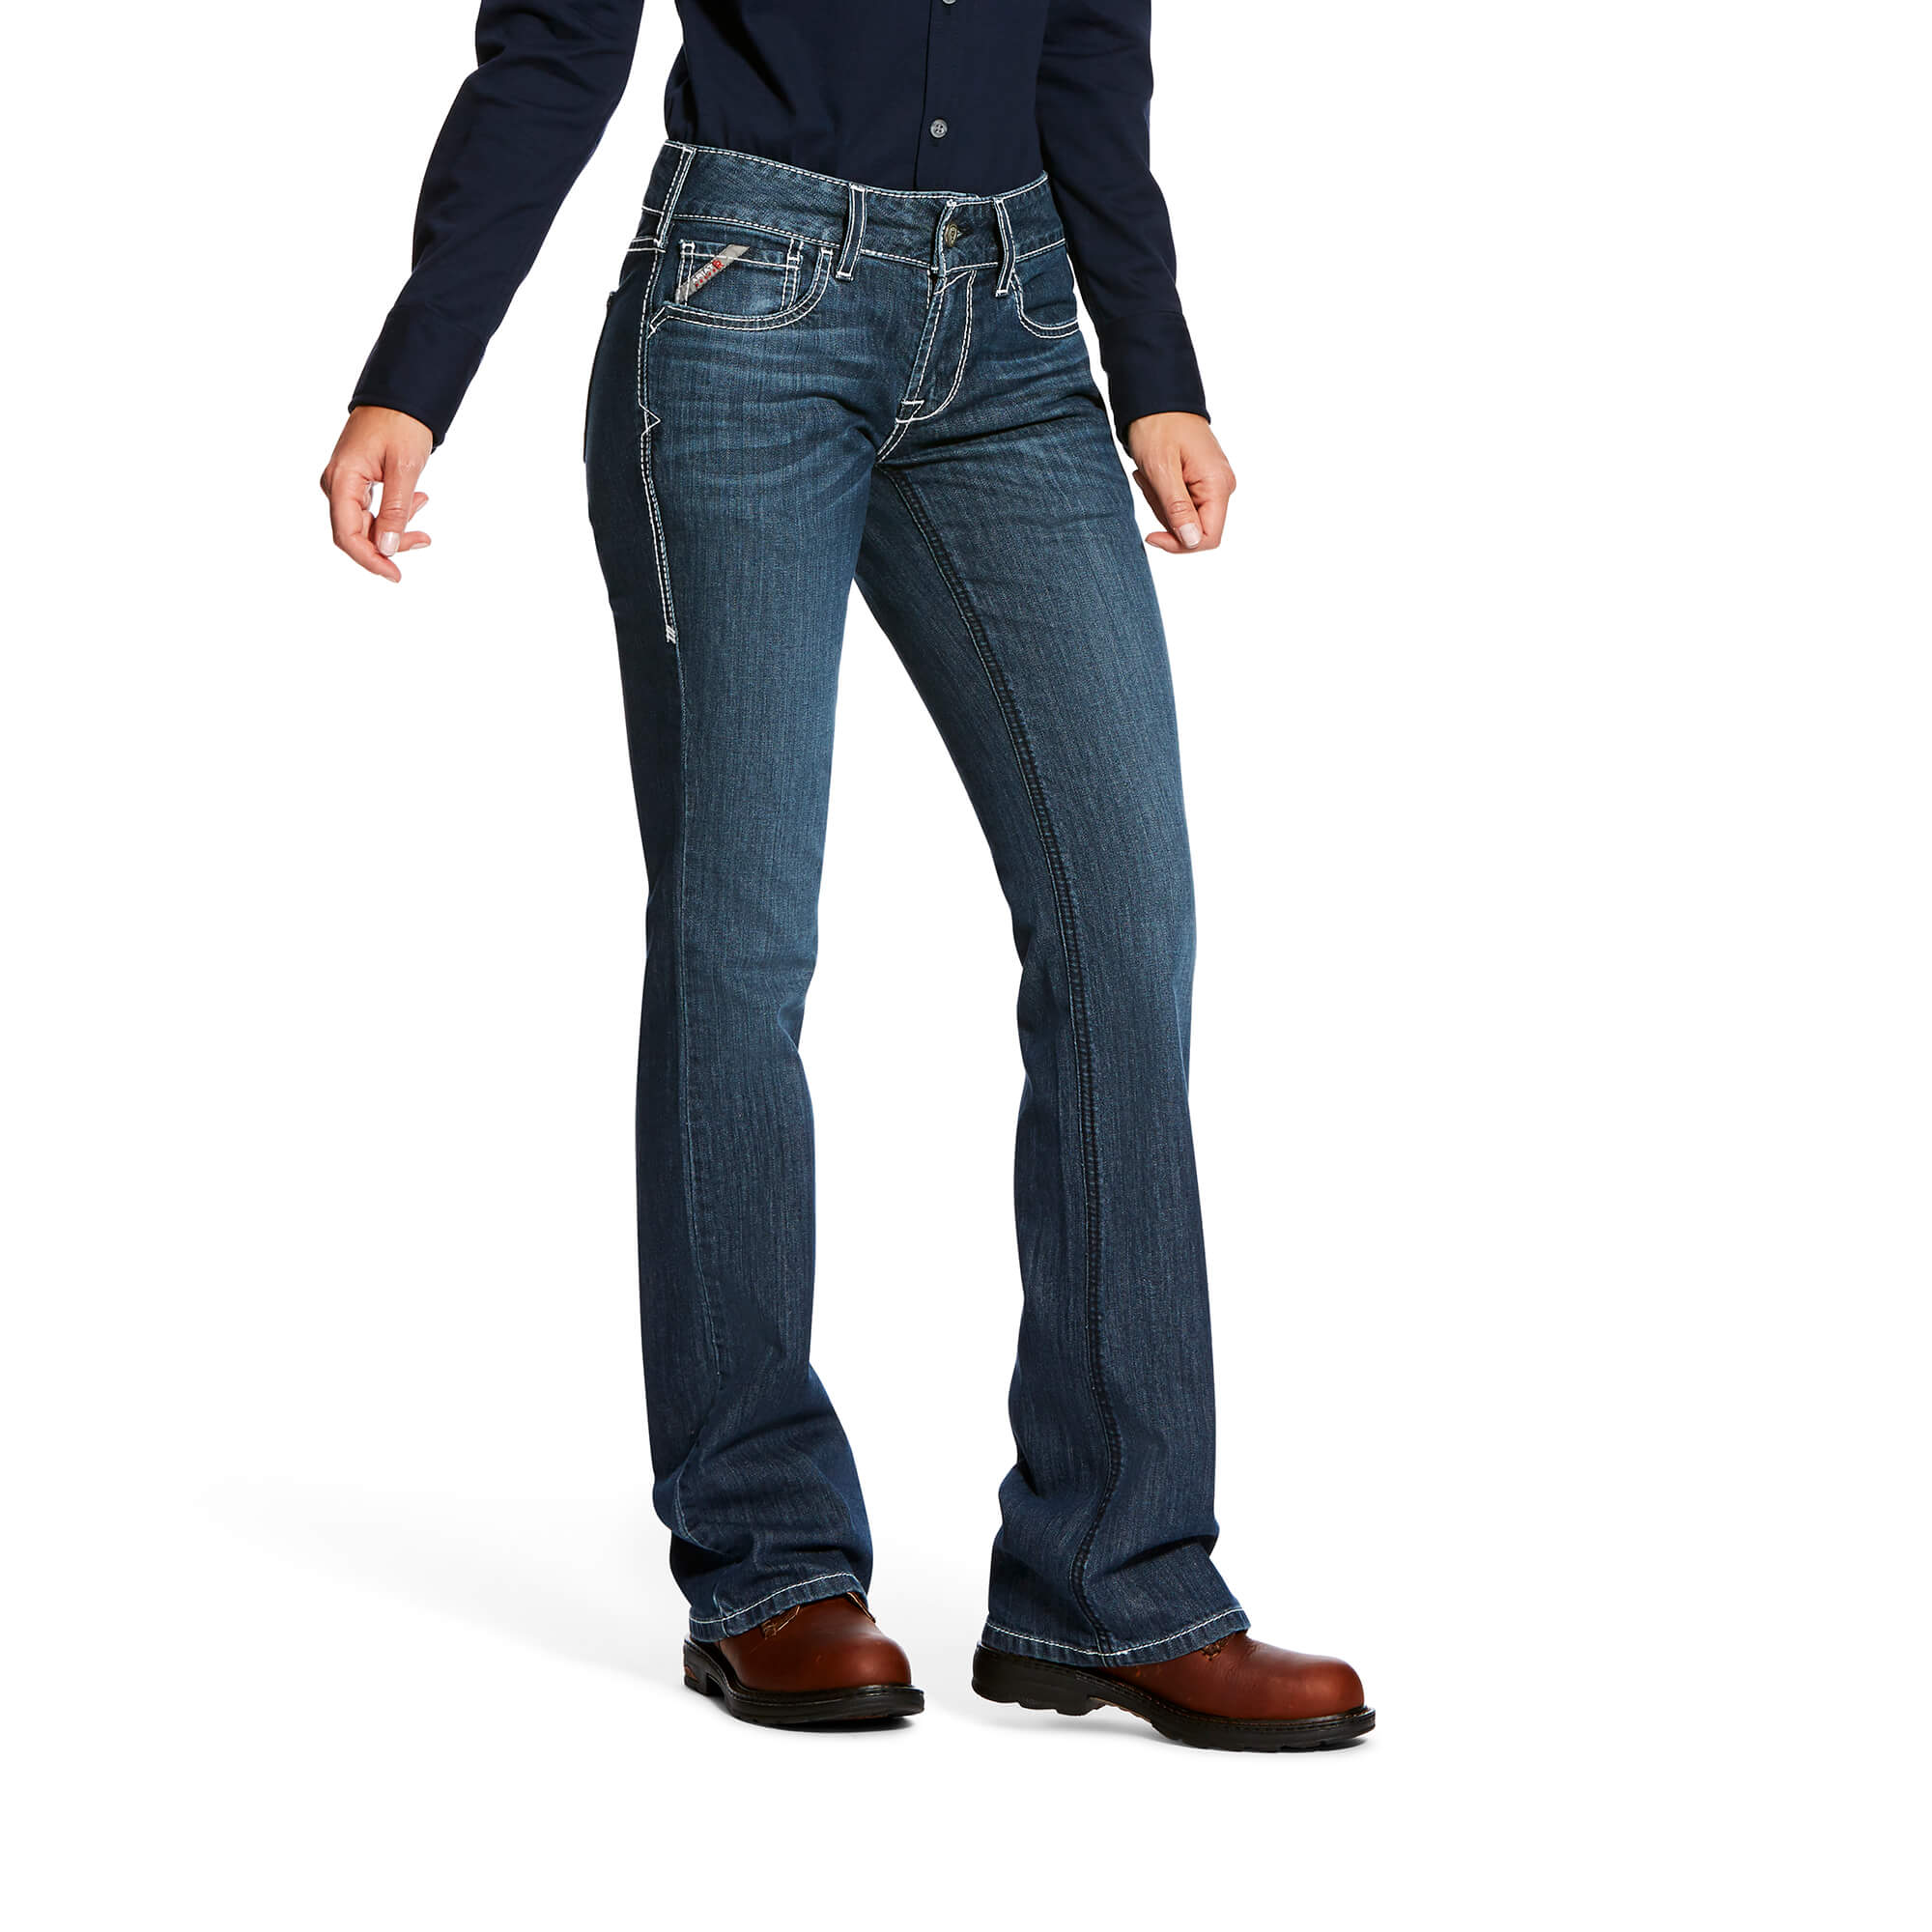 Ariat Women's FR DuraStretch Flame Resistant Mid Rise Bootcut Jean